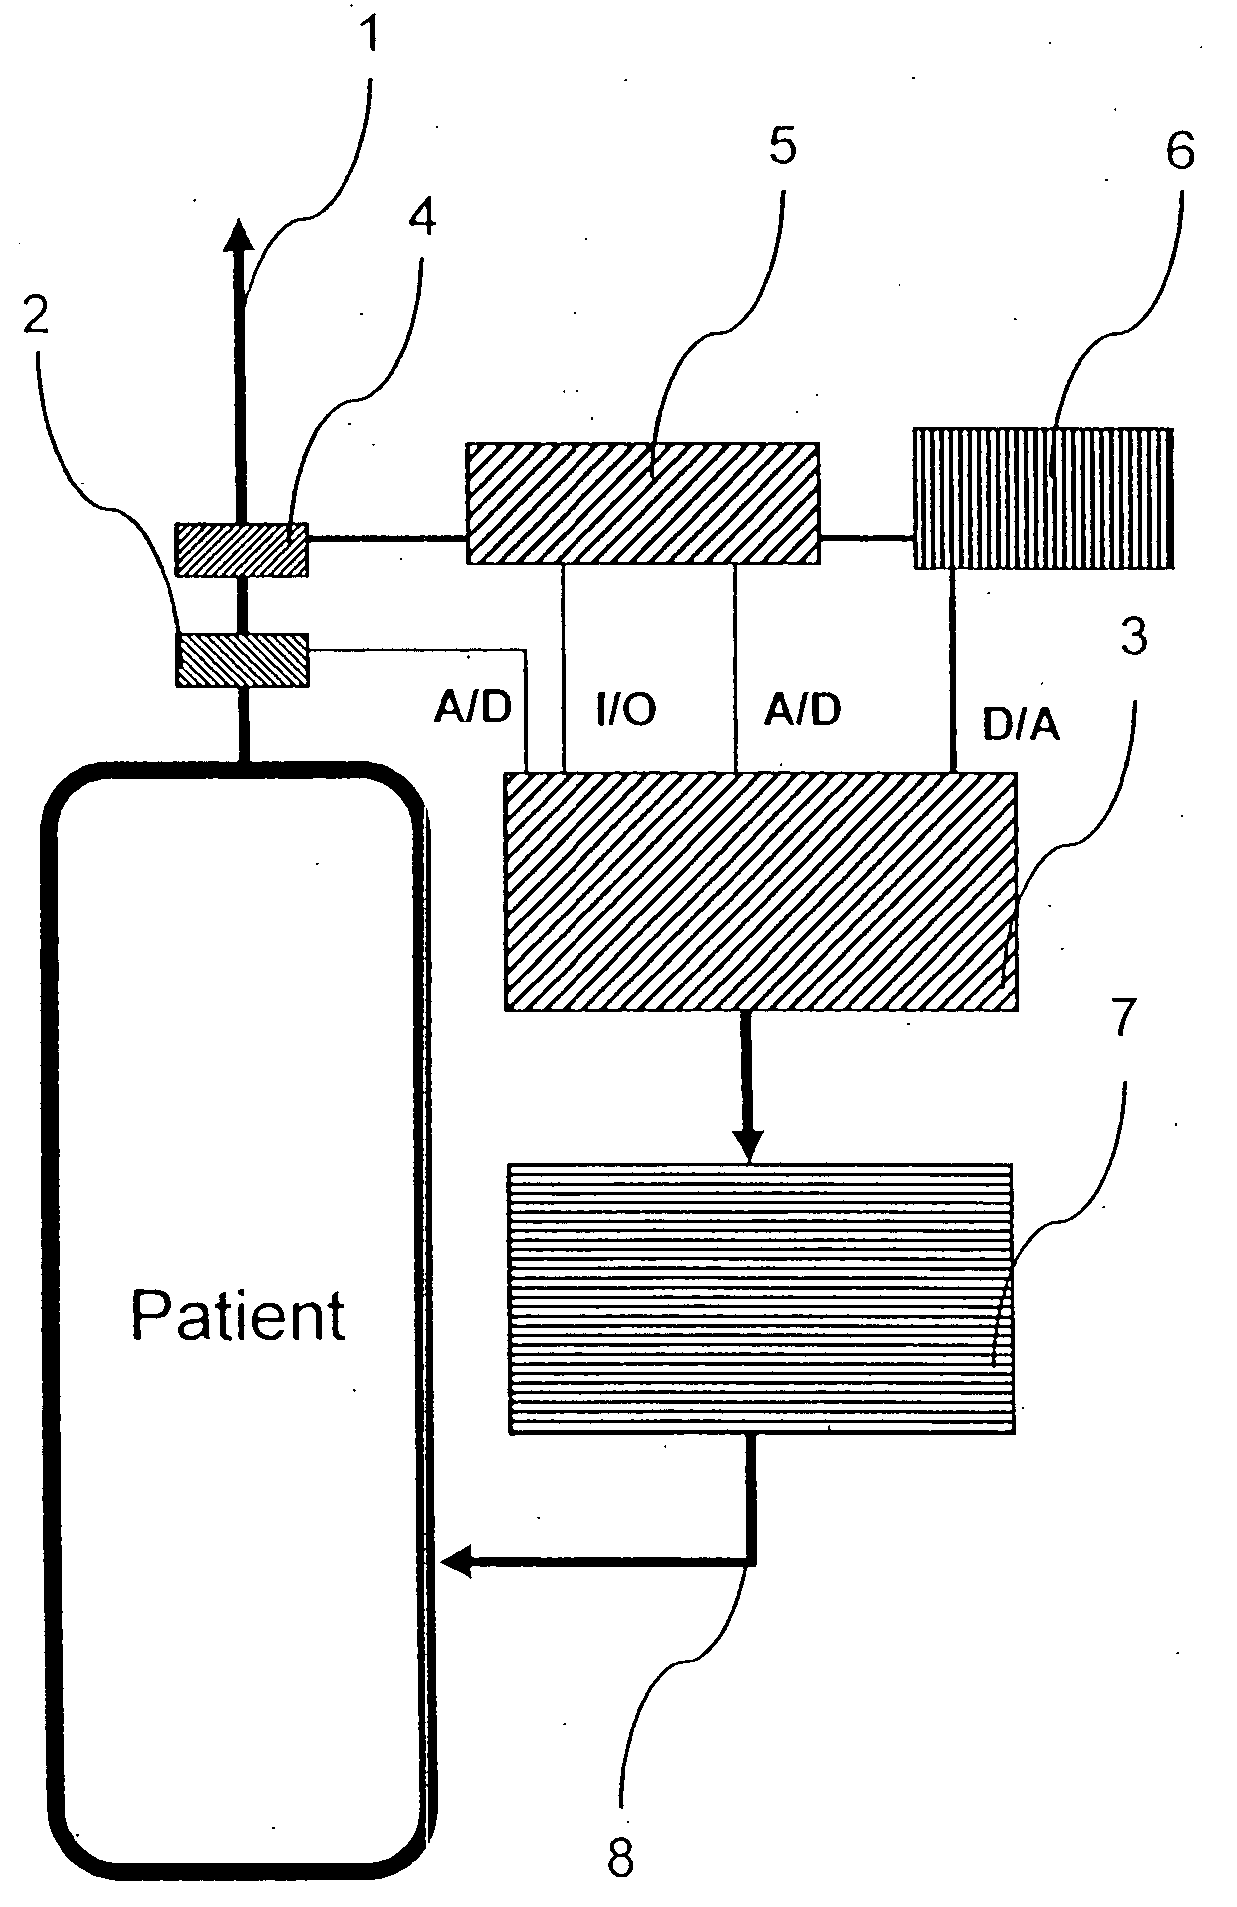 Measuring system for the determination of the concentration of propofol (2,6-diisopropylphenol) in the respiratory flow